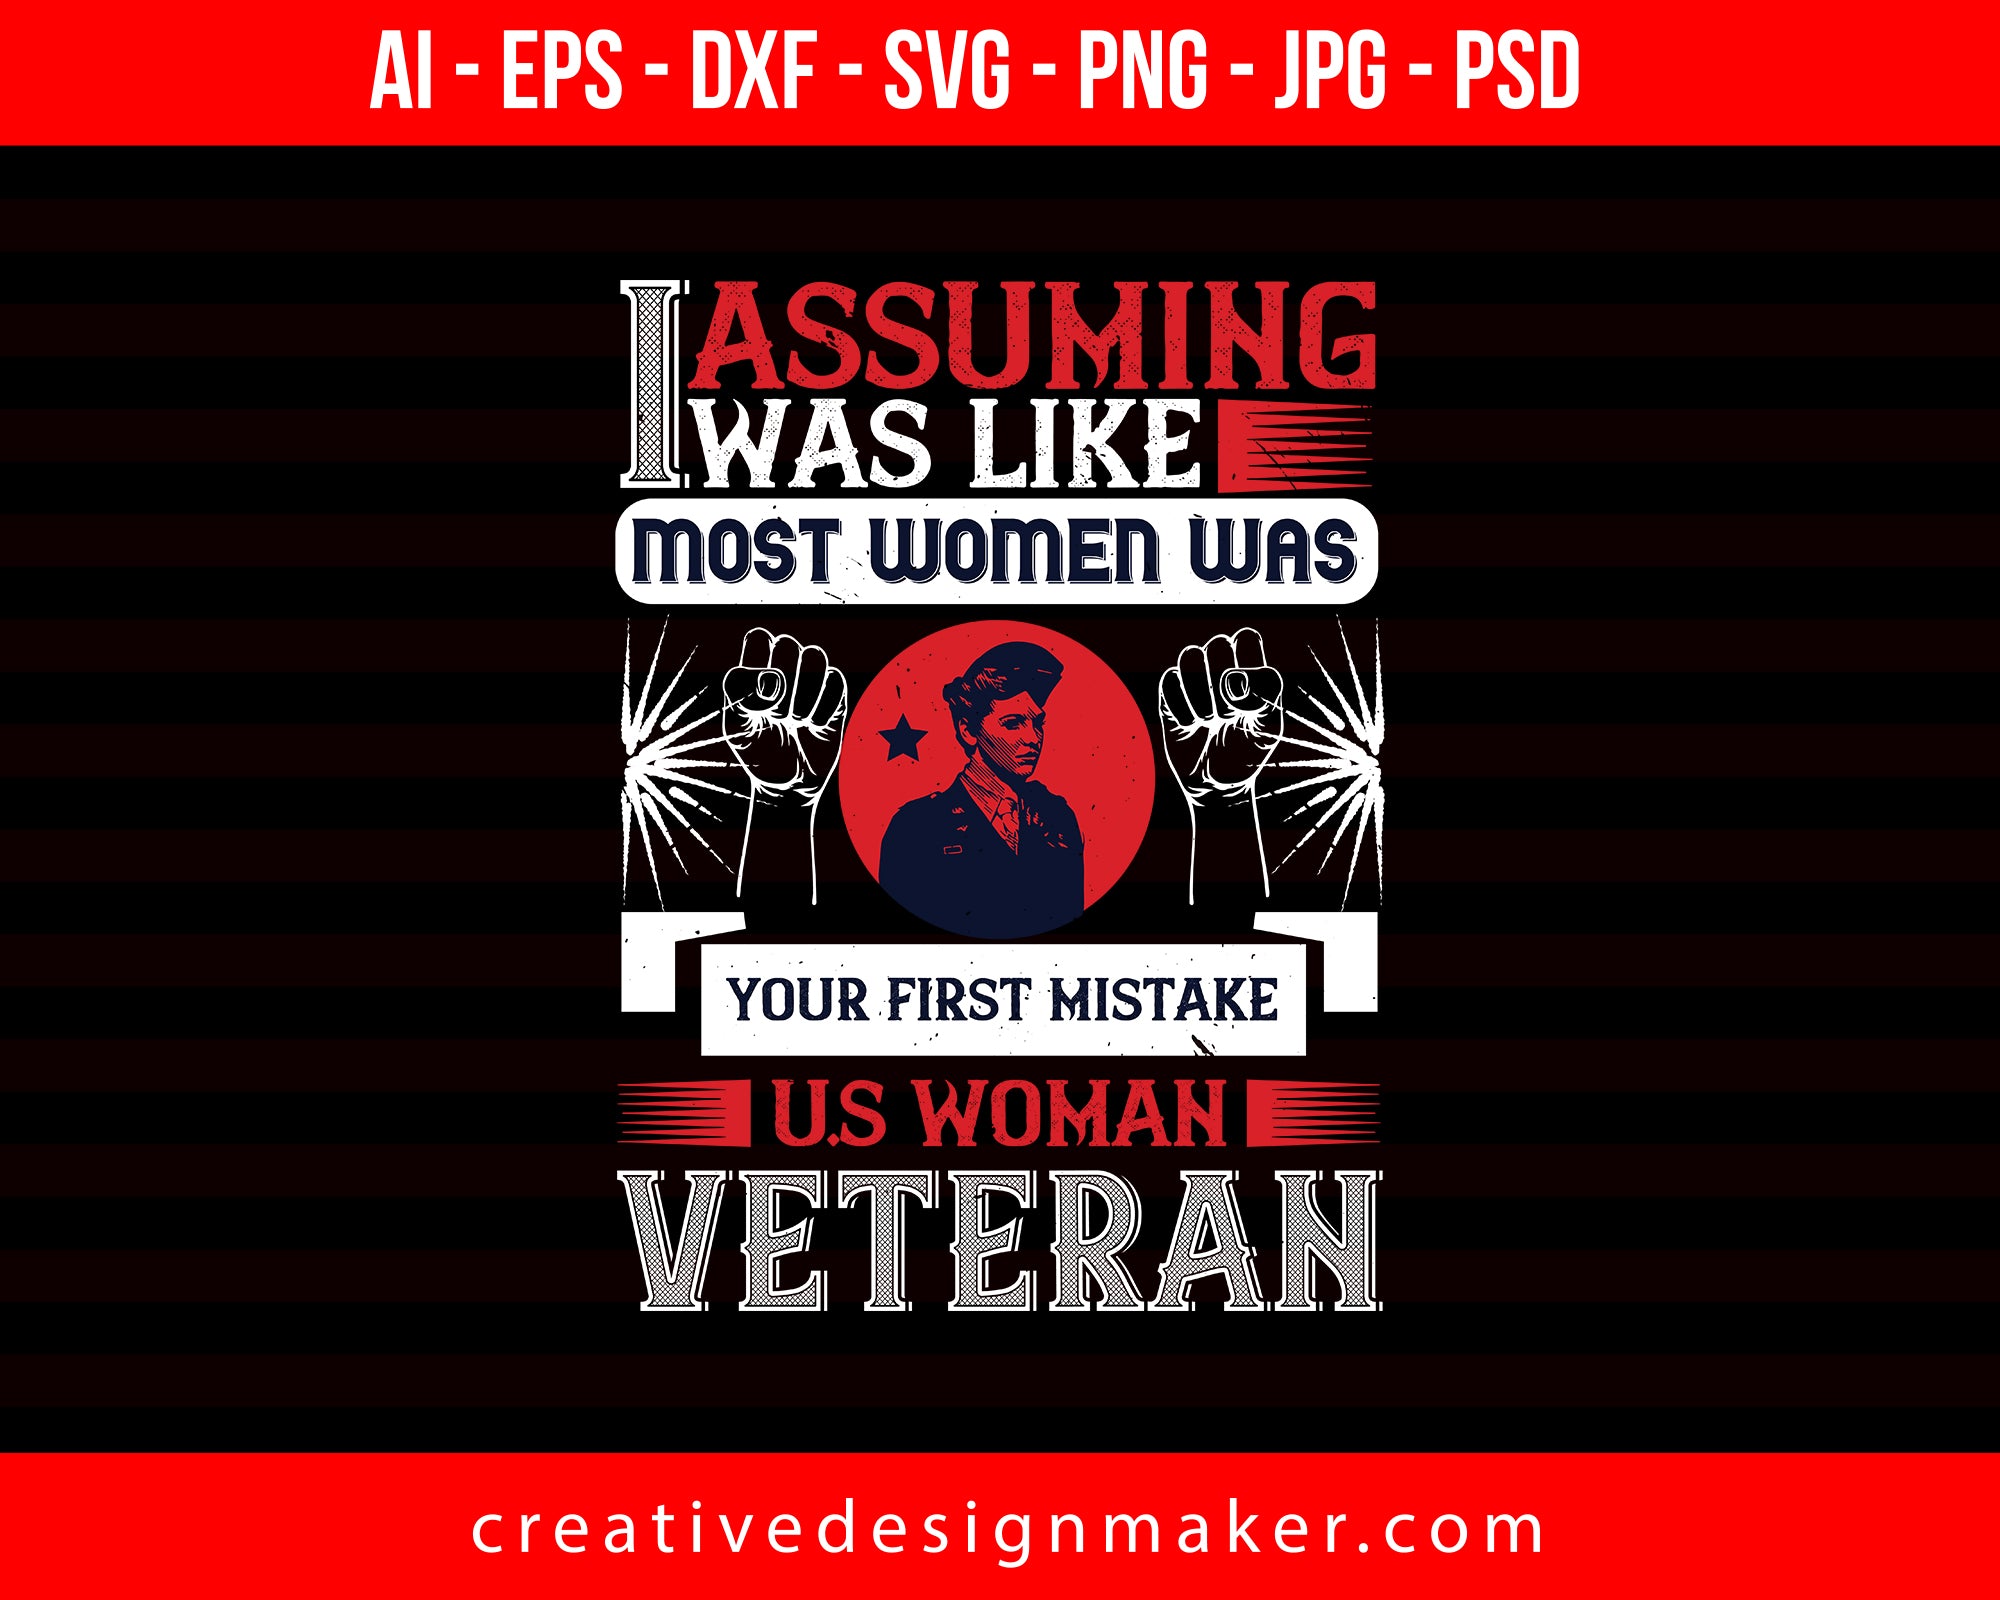 Assuming I Was Like Most Women Was Your First Mistake U.S Women Veterans Day Print Ready Editable T-Shirt SVG Design!